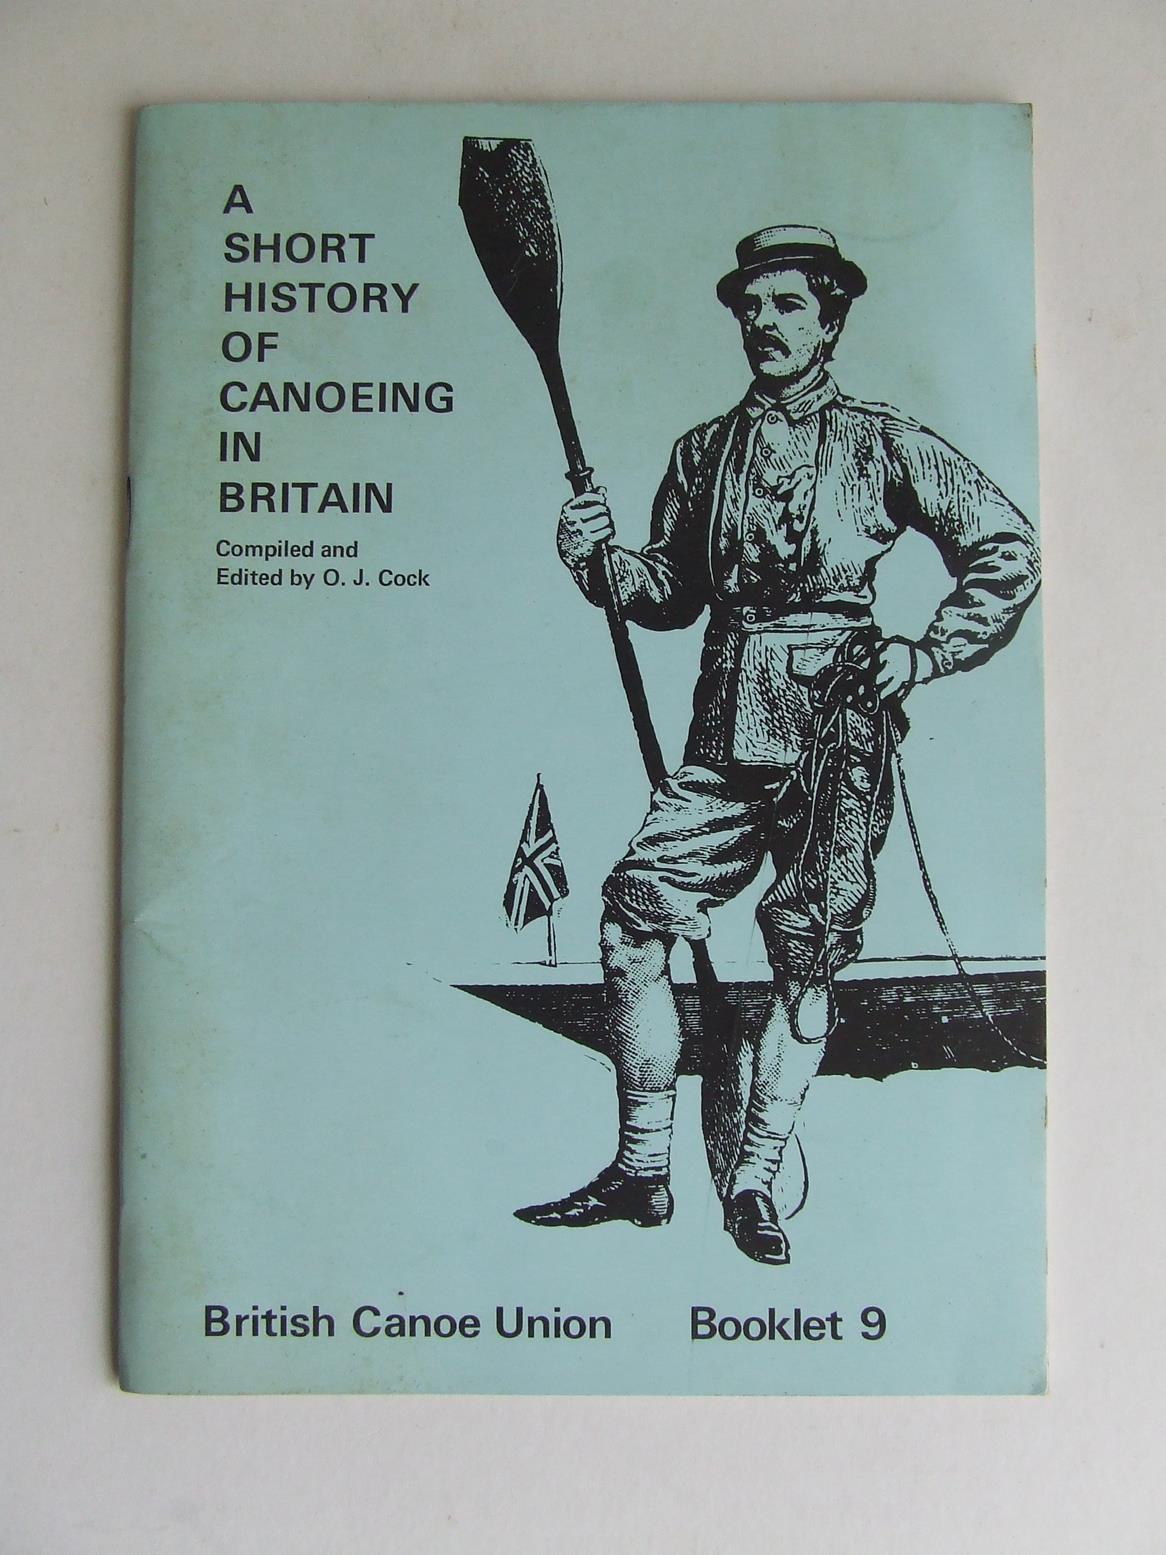 A Short history of Canoeing in Britain